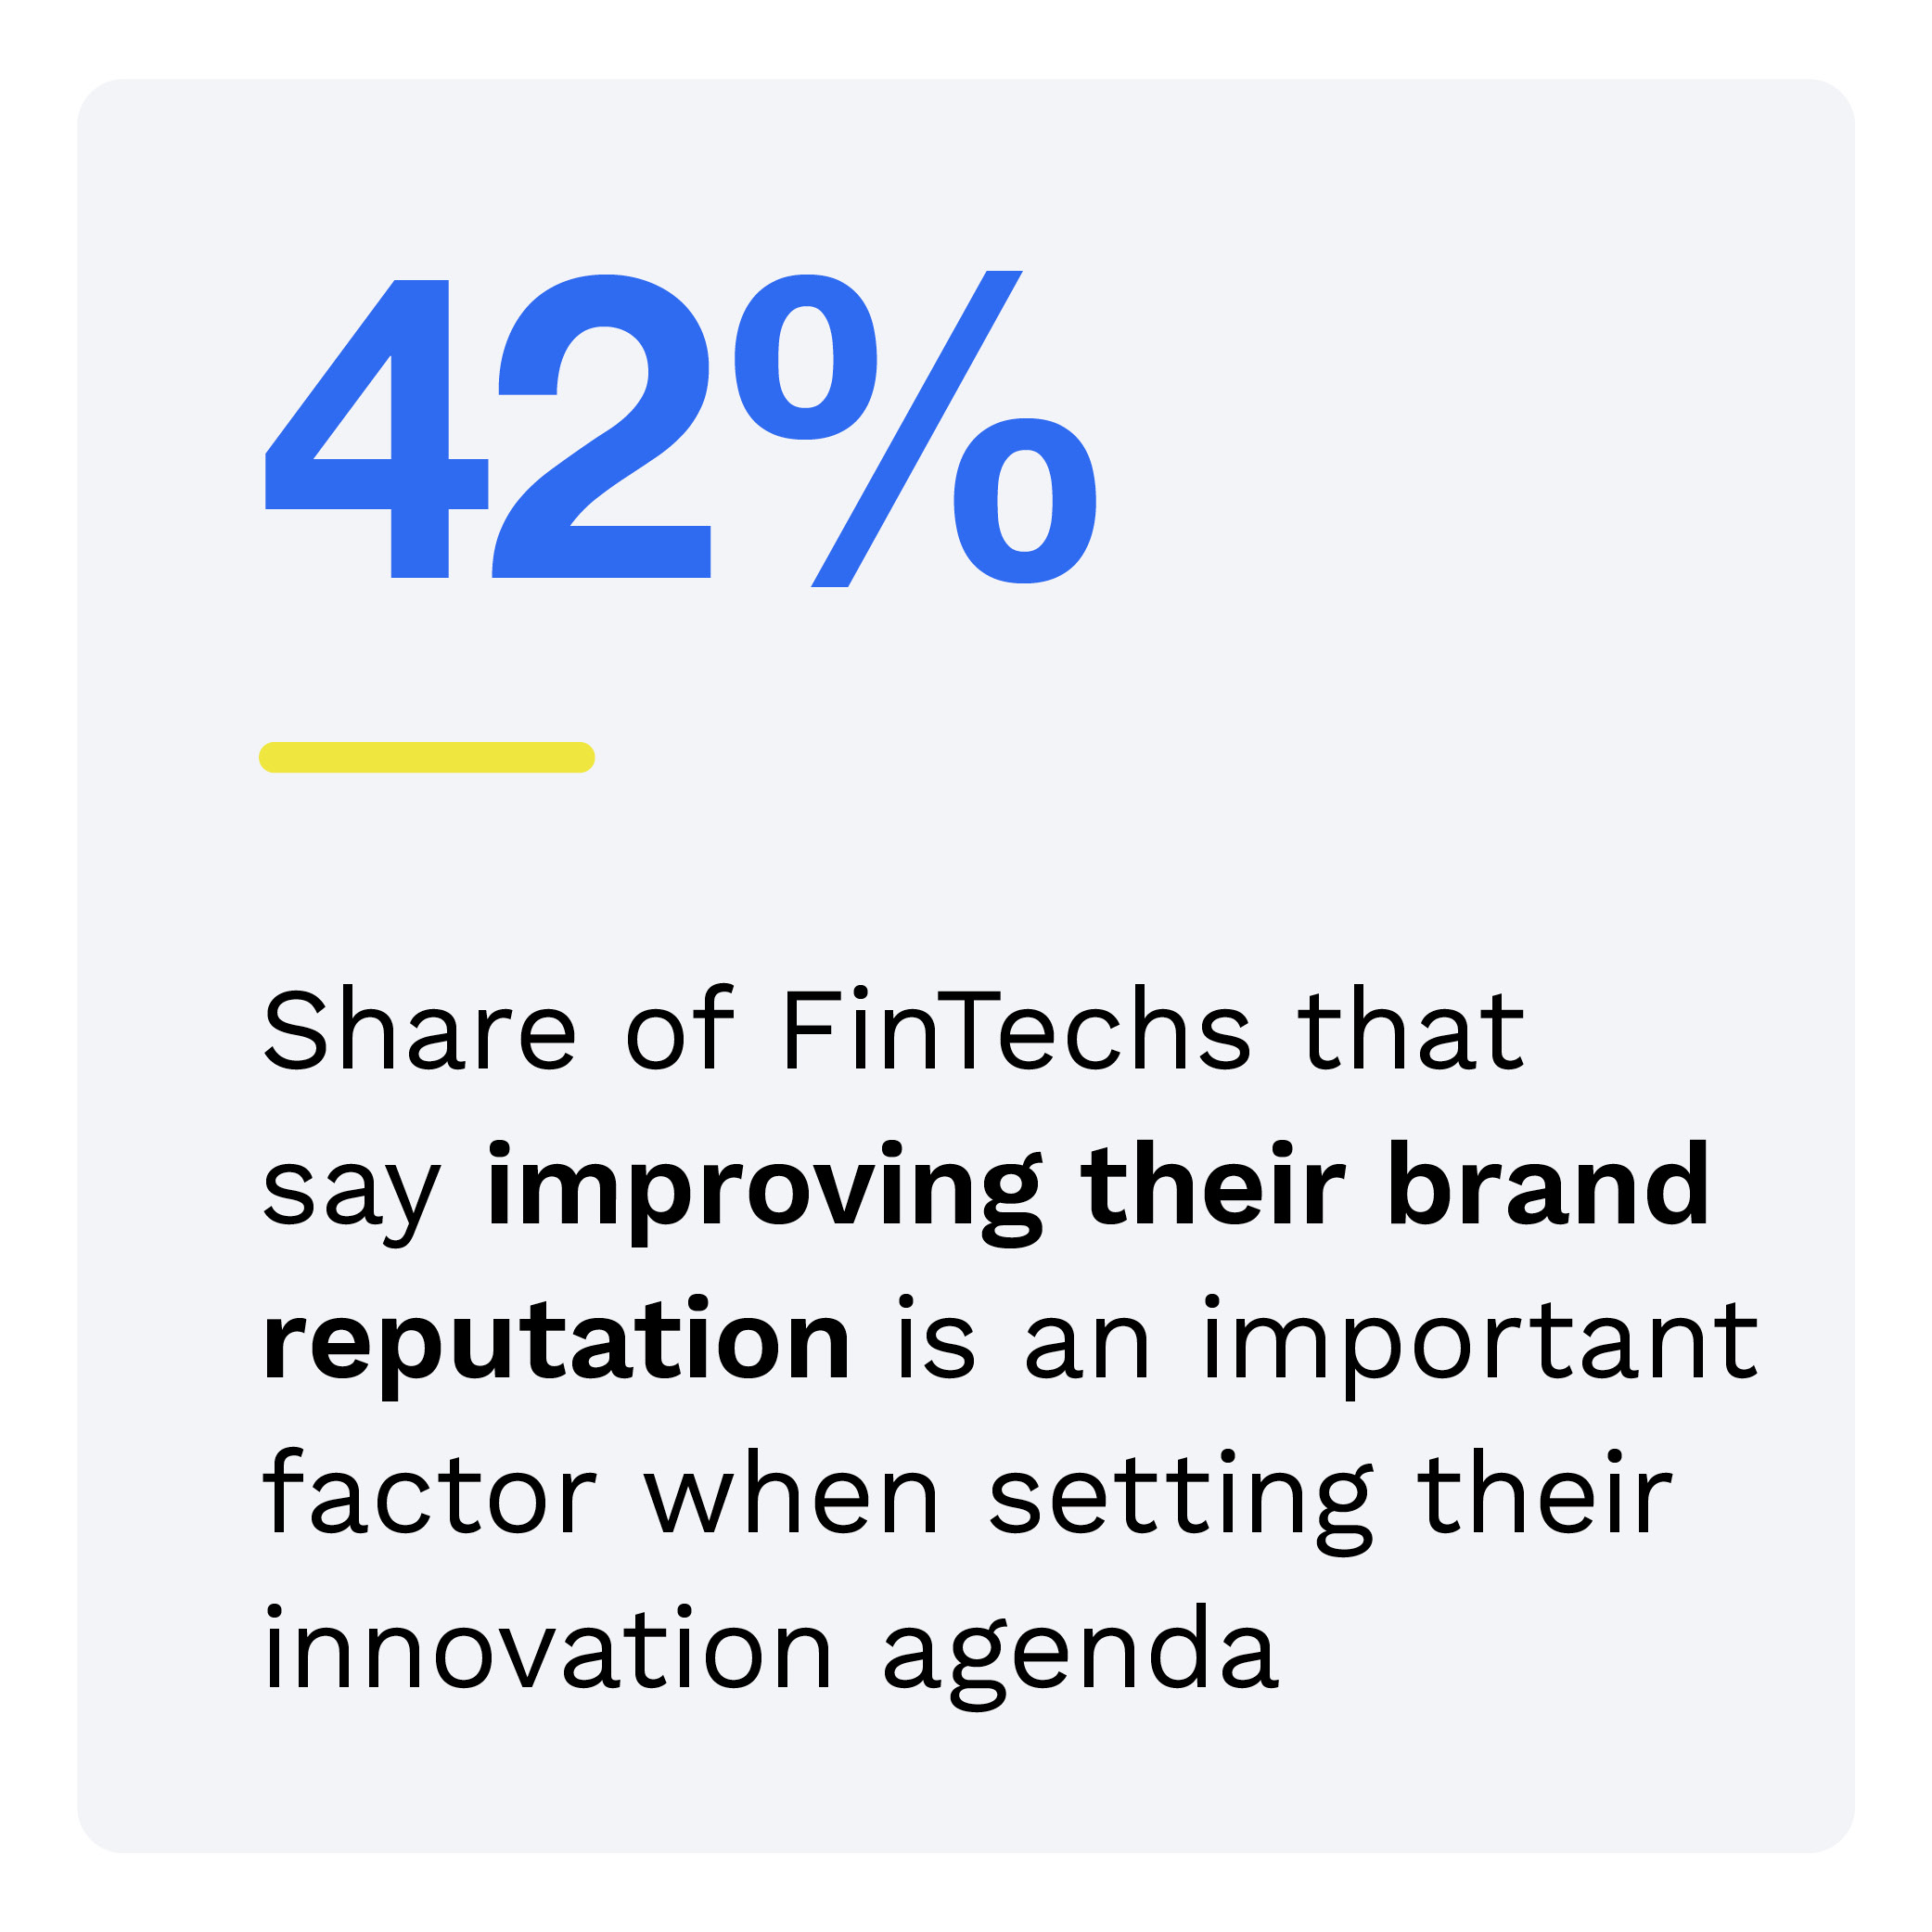 42%: Share of FinTechs that say improving their brand reputation is an important factor when setting their innovation agenda